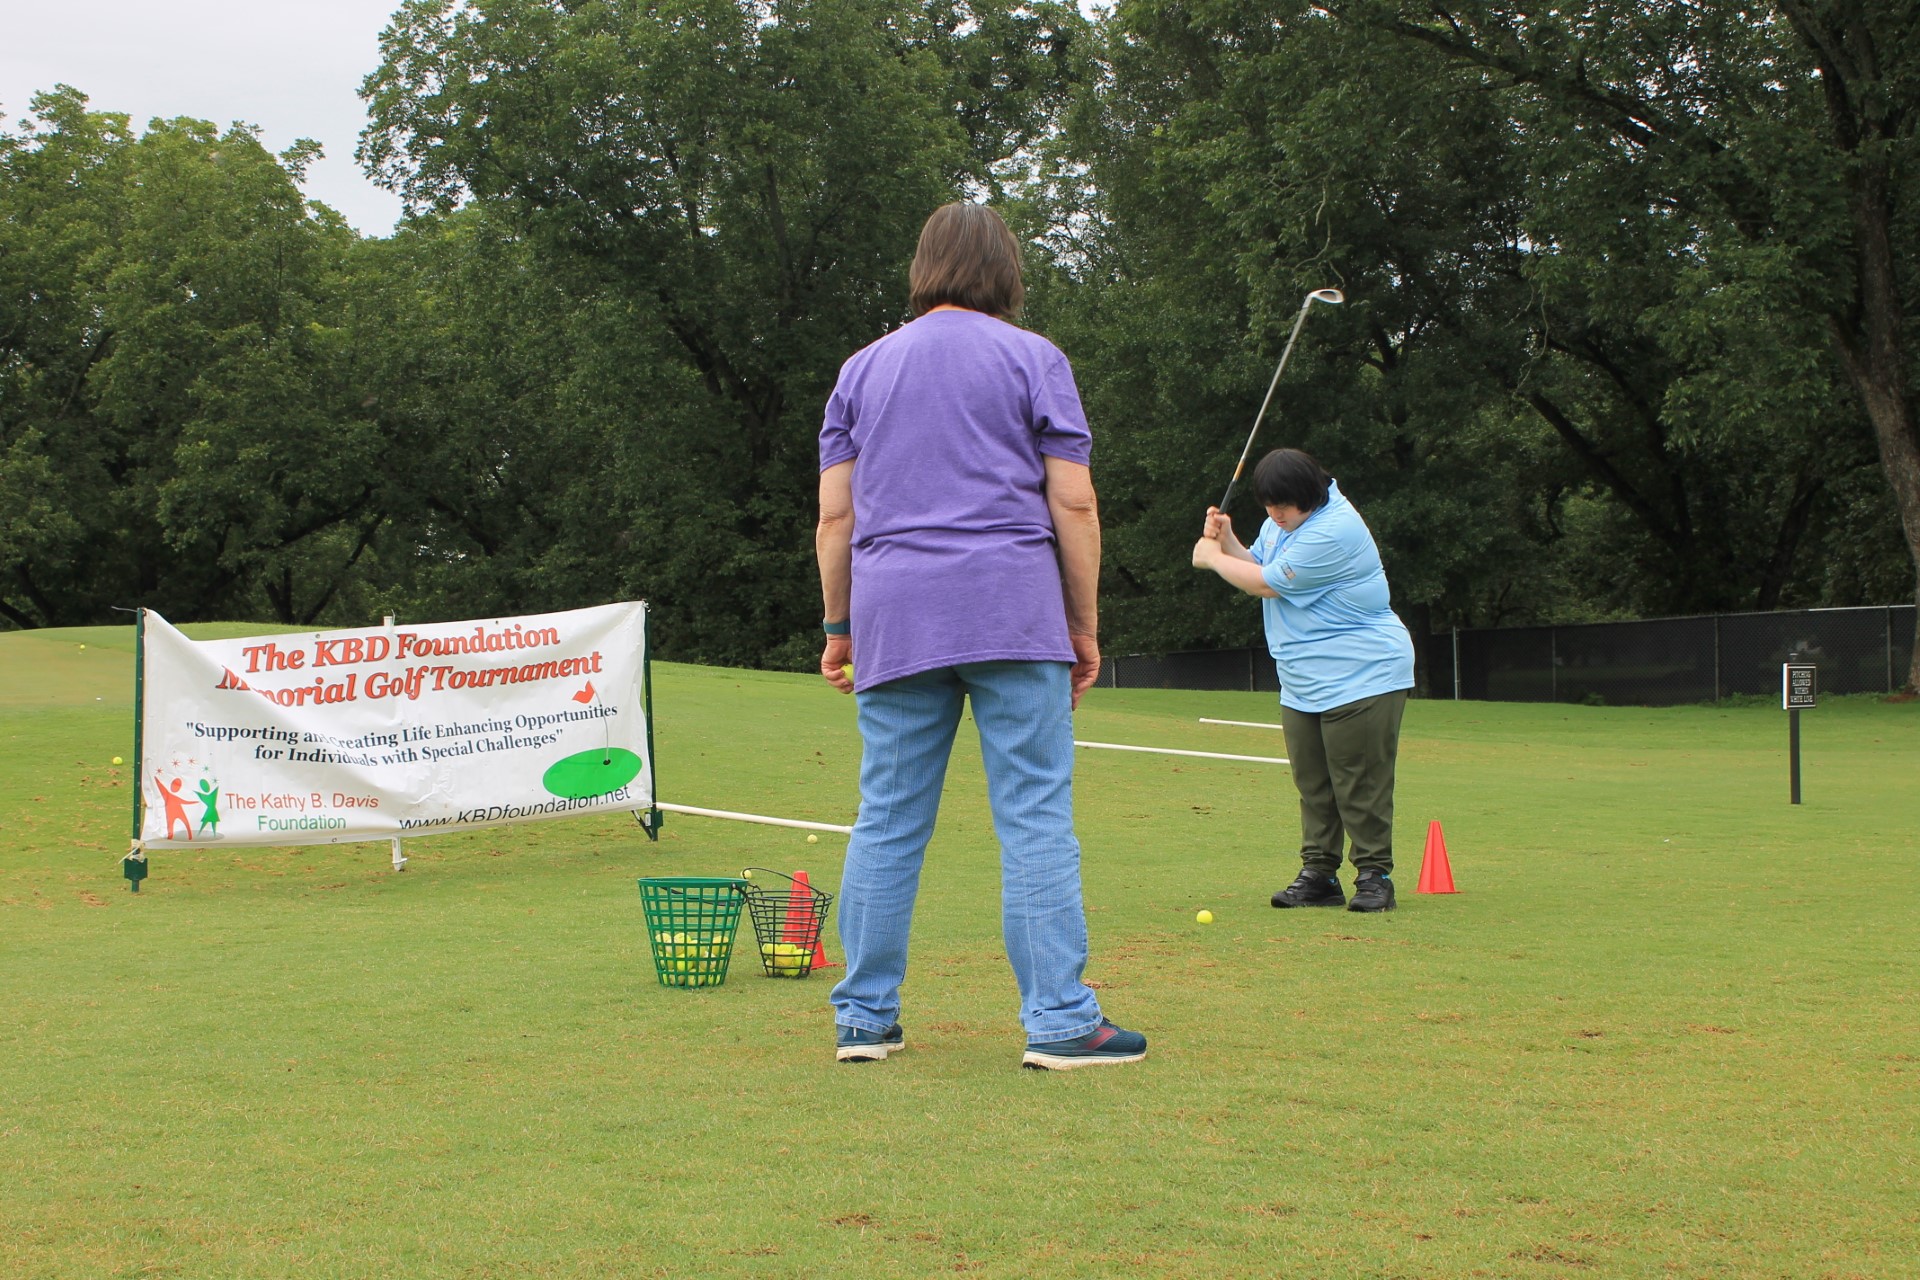 A photograph of two individuals on the putting green. One has their back to the camera and is watching the other prepare to strike a golf ball. A banner to their left reads, " The KBD Foundation Memorial Golf Tournament, 'Supporting and creating Life Enhancing Opportunities for Individuals with Special Challenges;" The Kathy B. Davis Foundation; www.KBDfoundation.net"